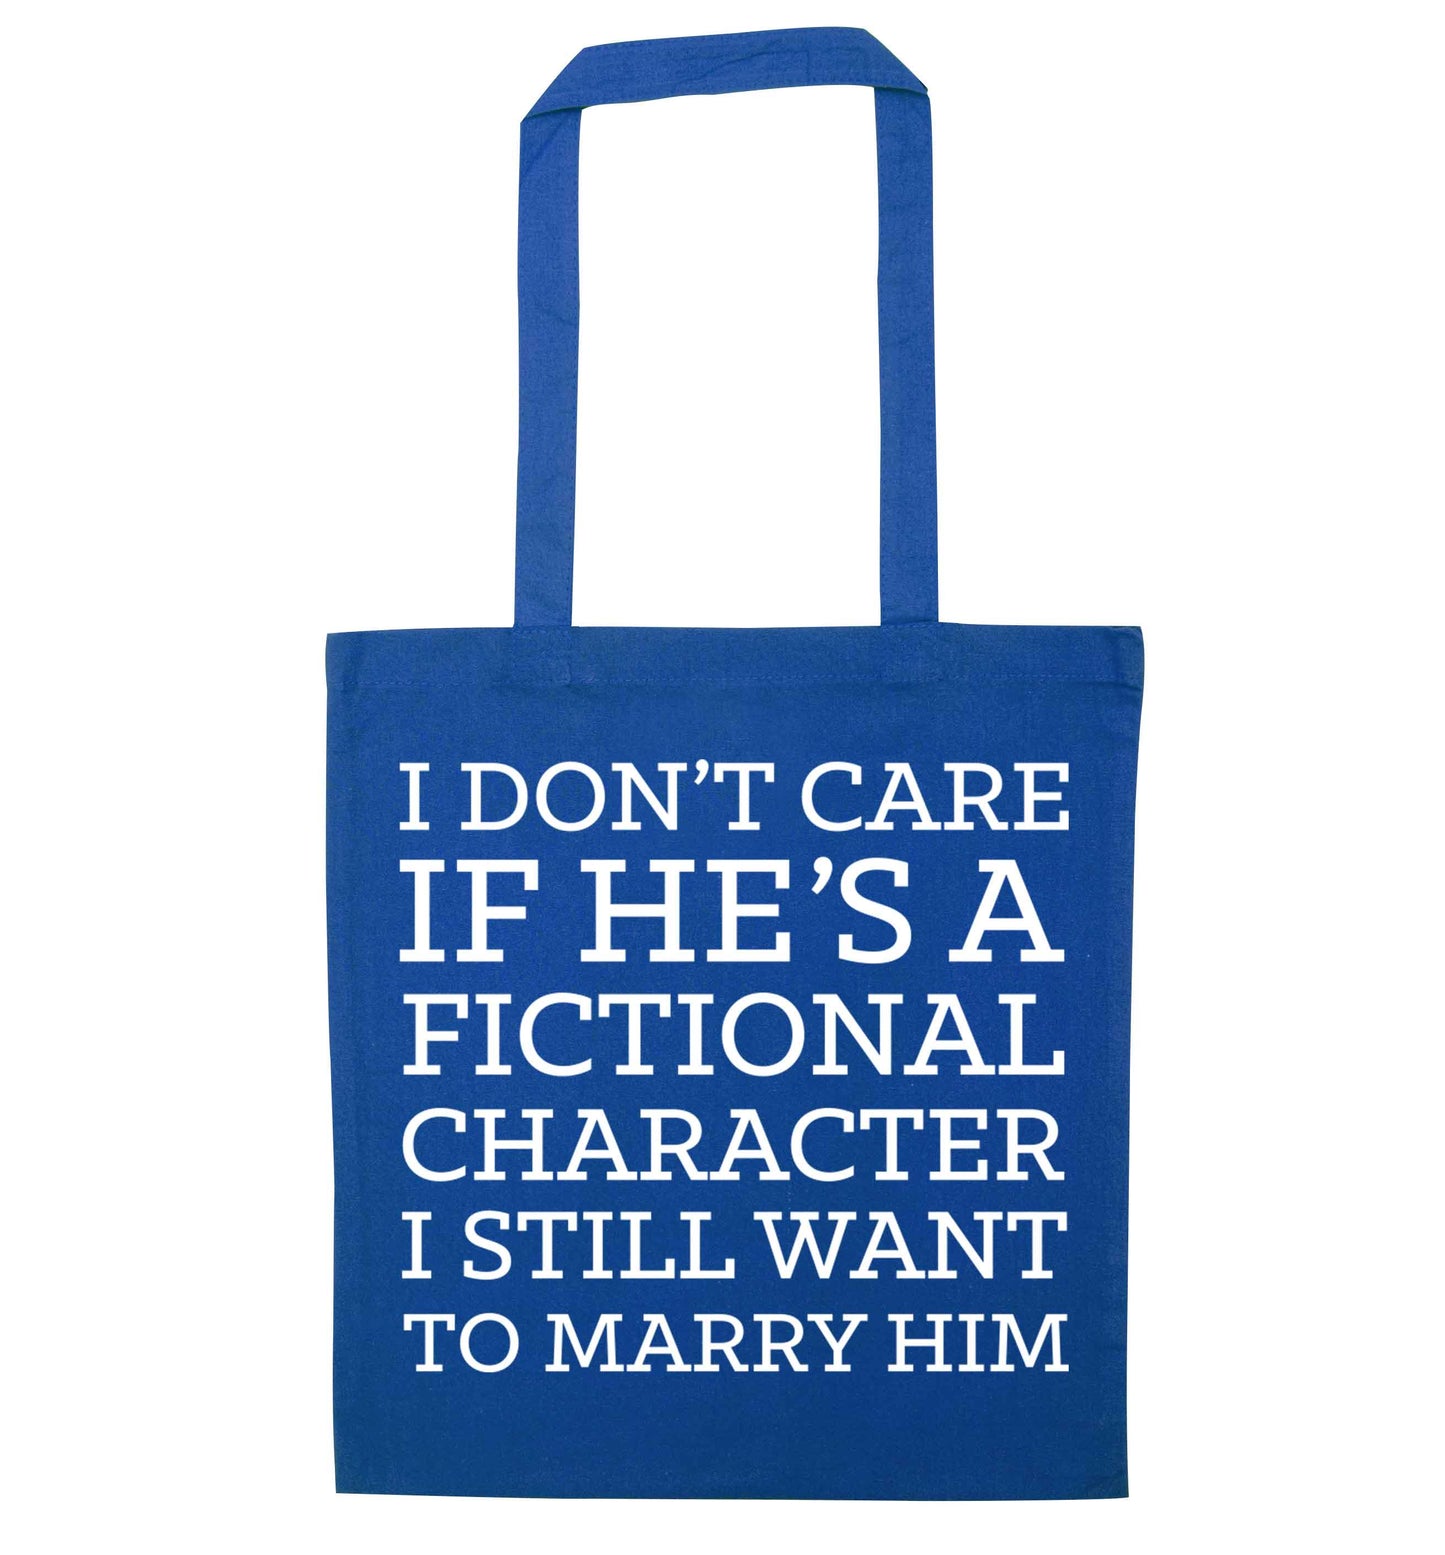 I don't care if he's a fictional character I still want to marry him blue tote bag